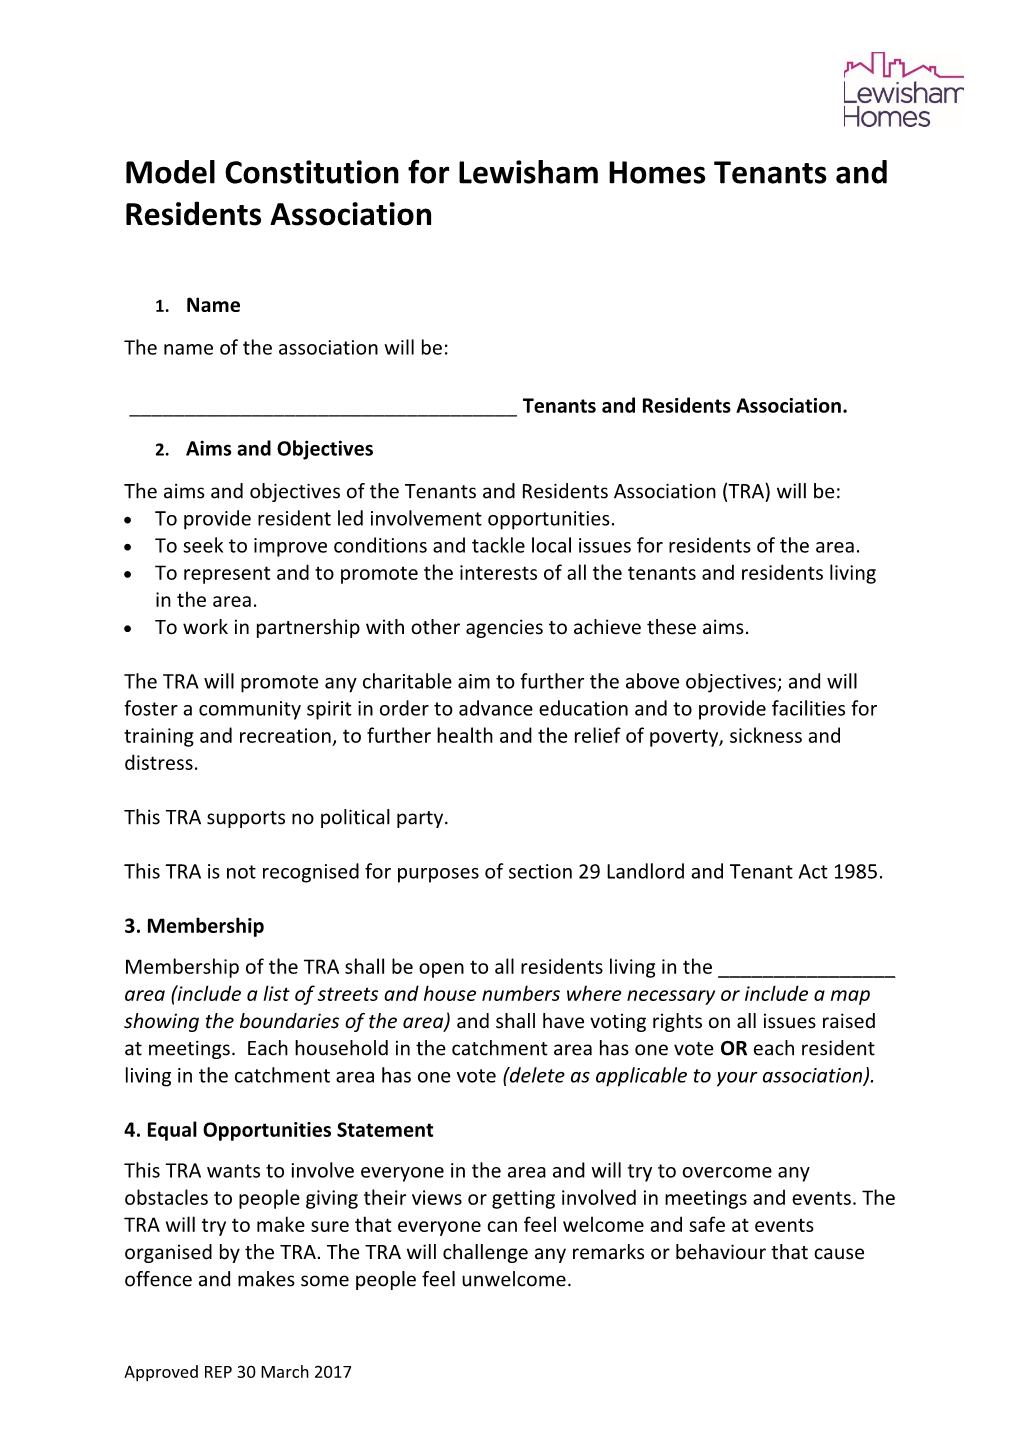 Model Constitution for Lewisham Homes Tenants and Residents Association